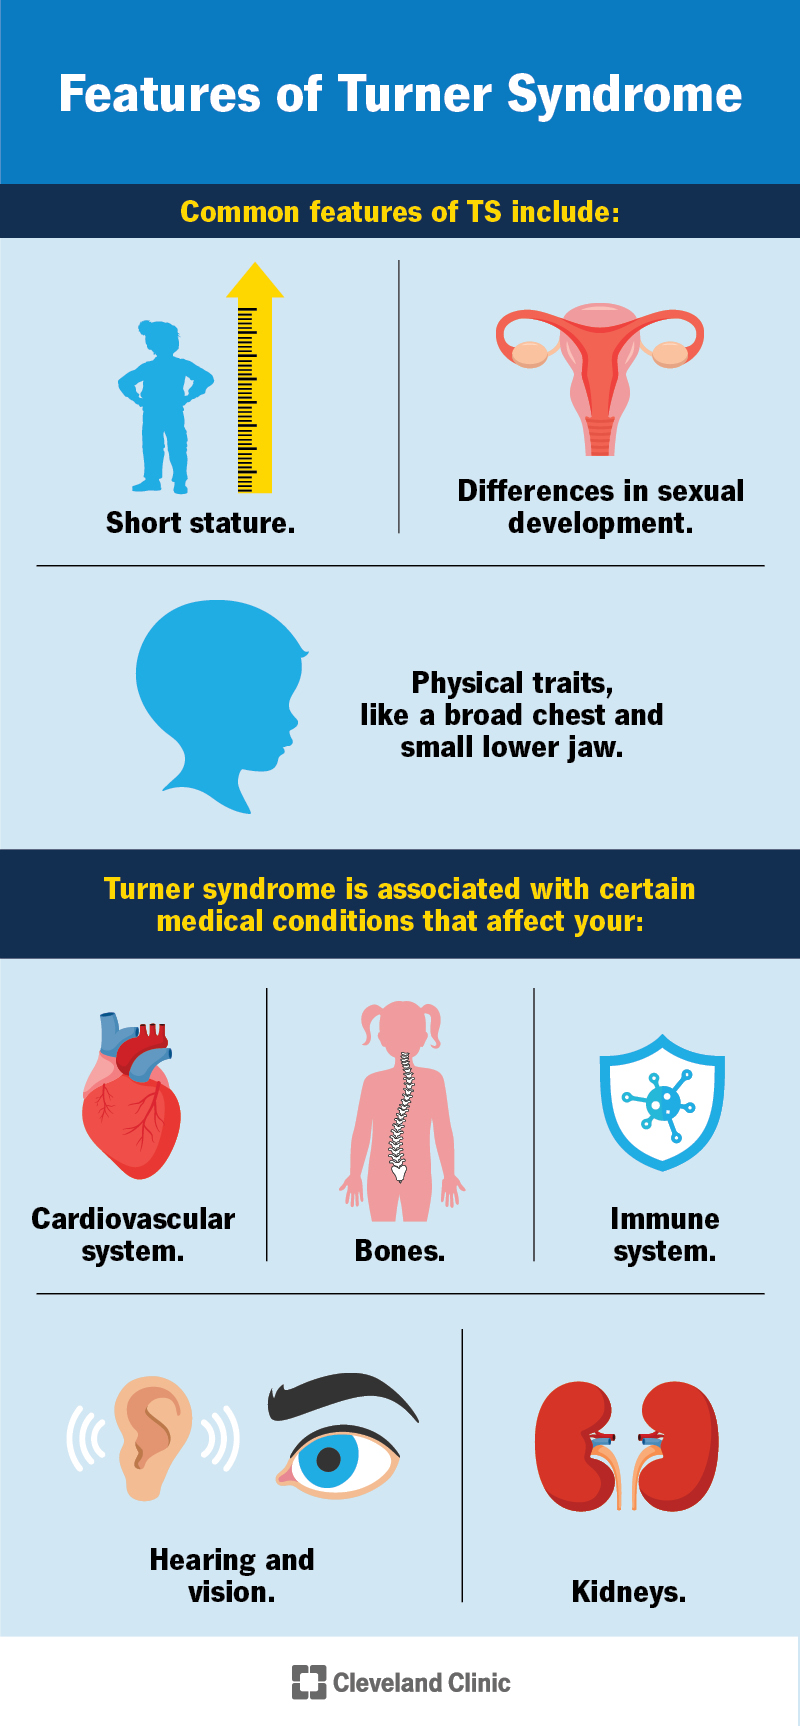 Common features of Turner syndrome include short stature, differences in sexual development and certain physical traits.